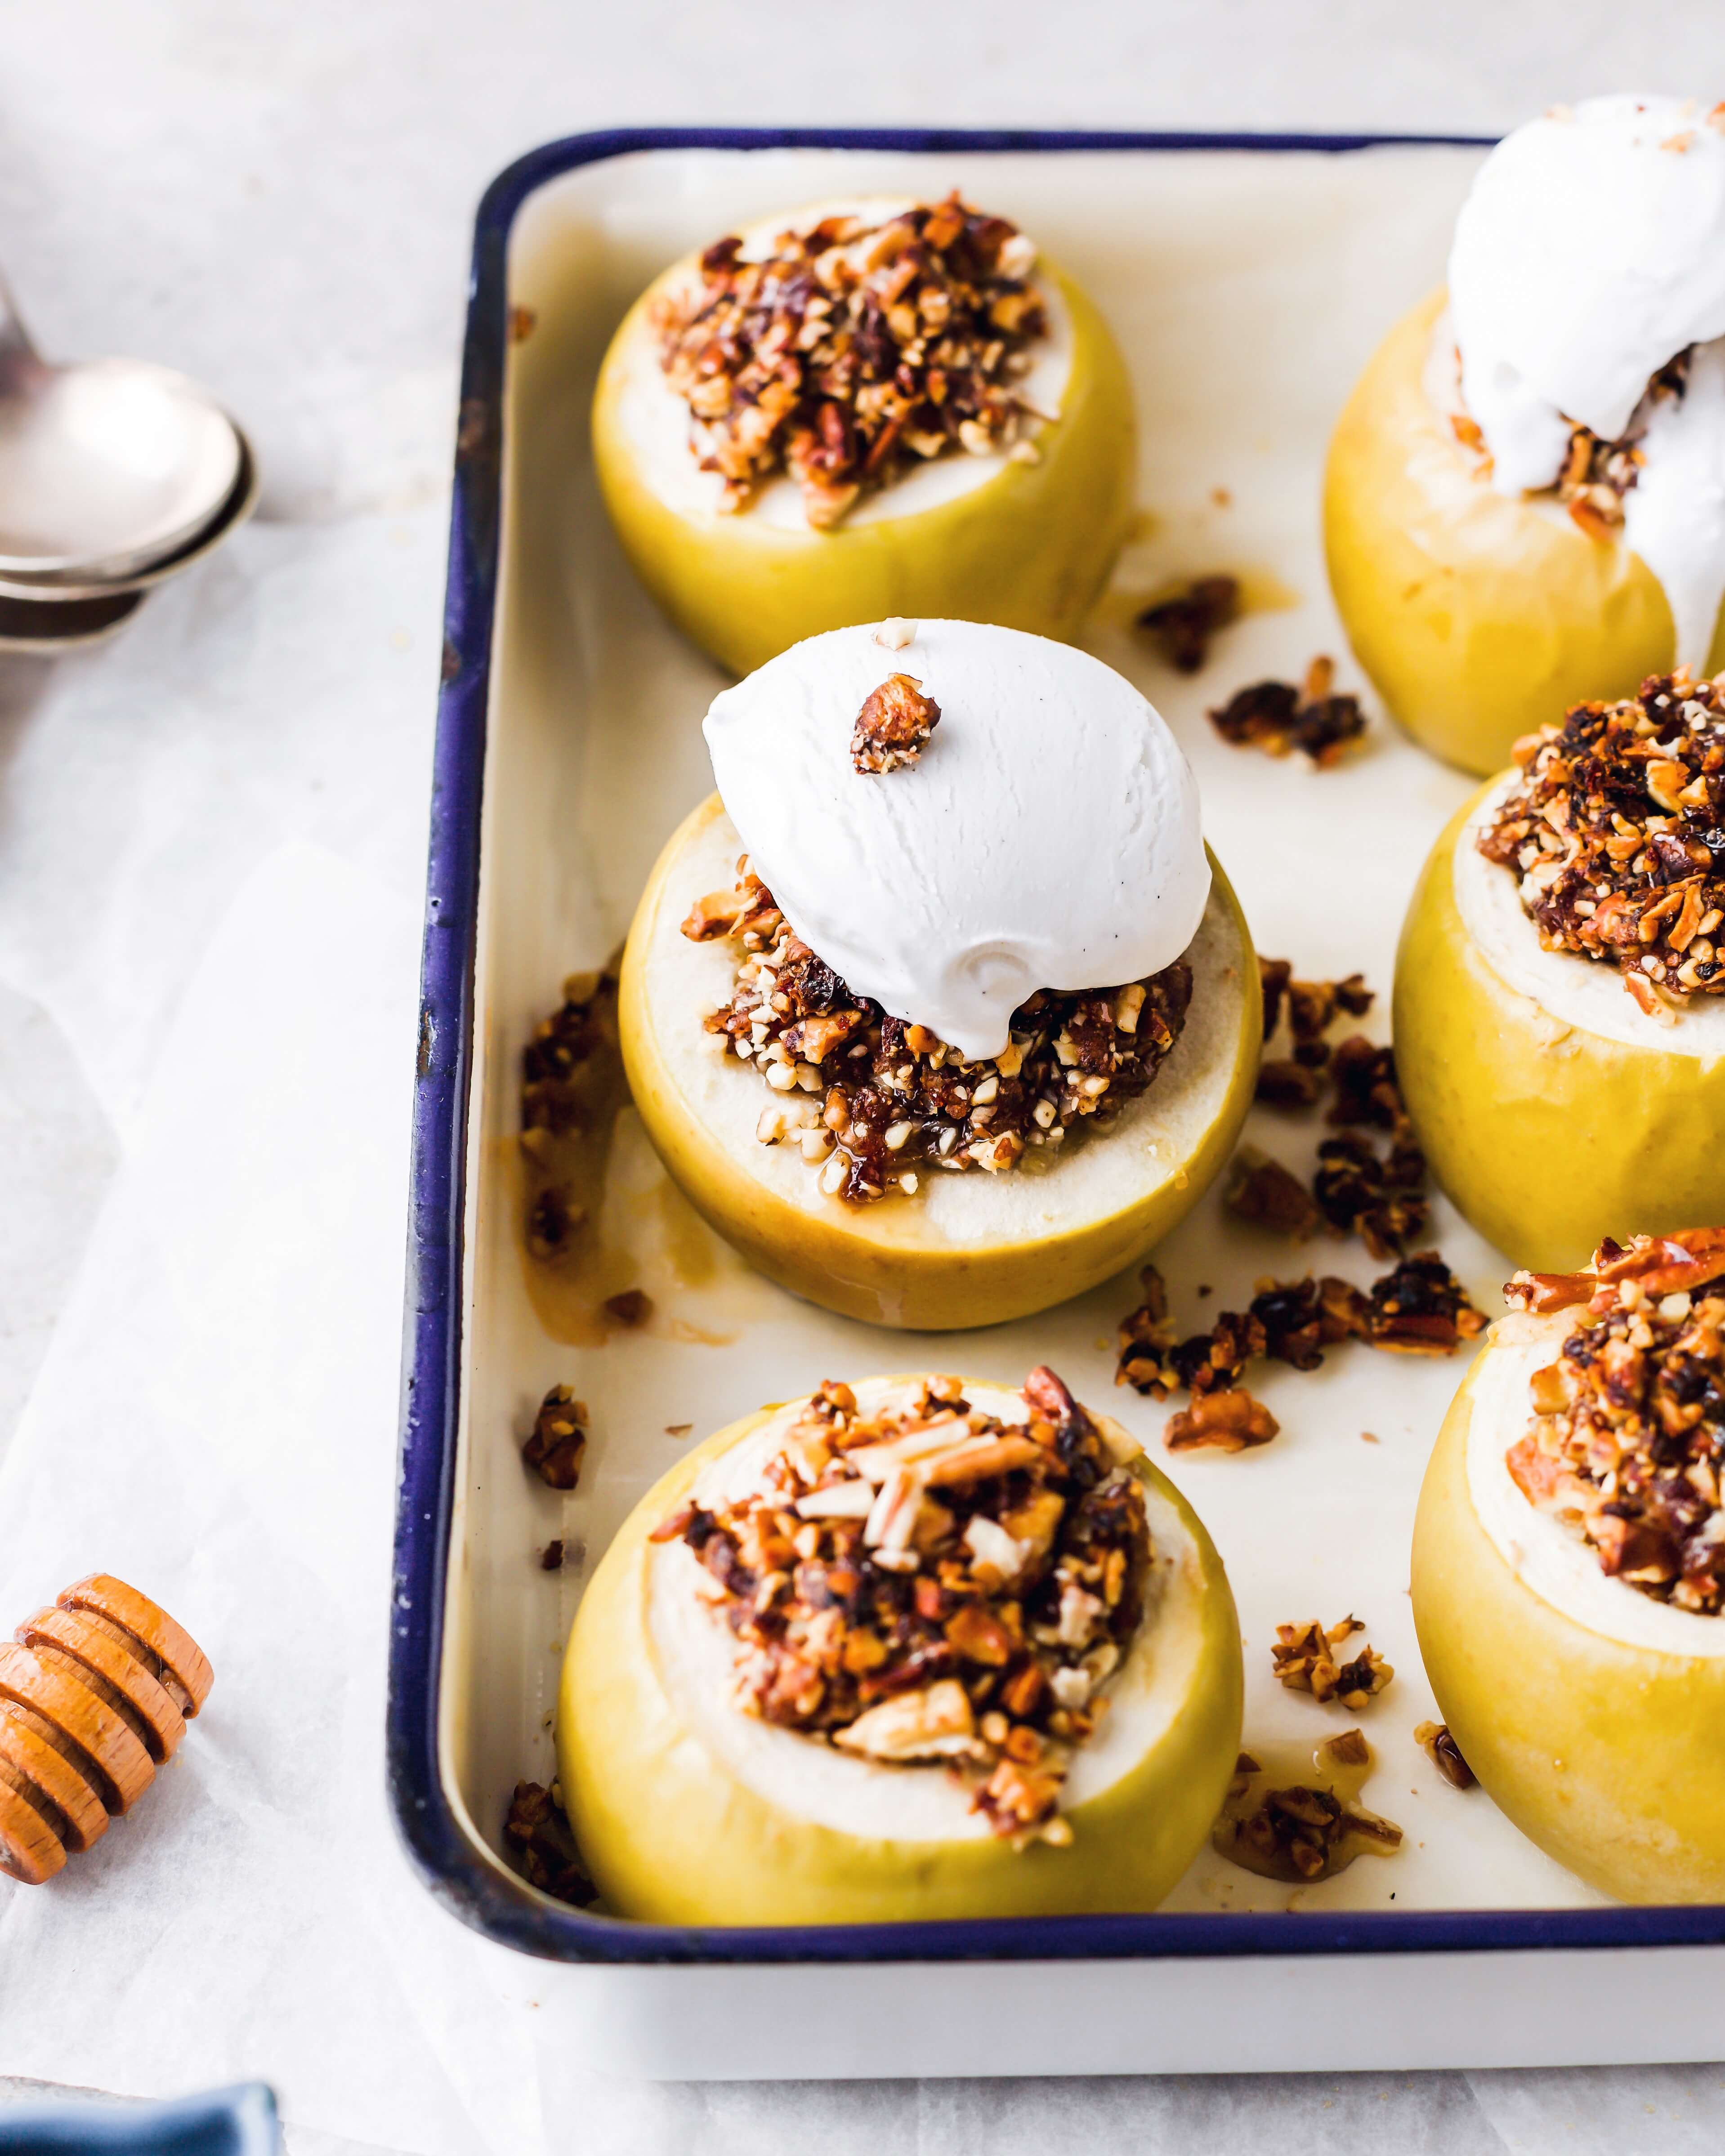 Stuffed Baked Apples With Pecans, Dates And Ice-Cream